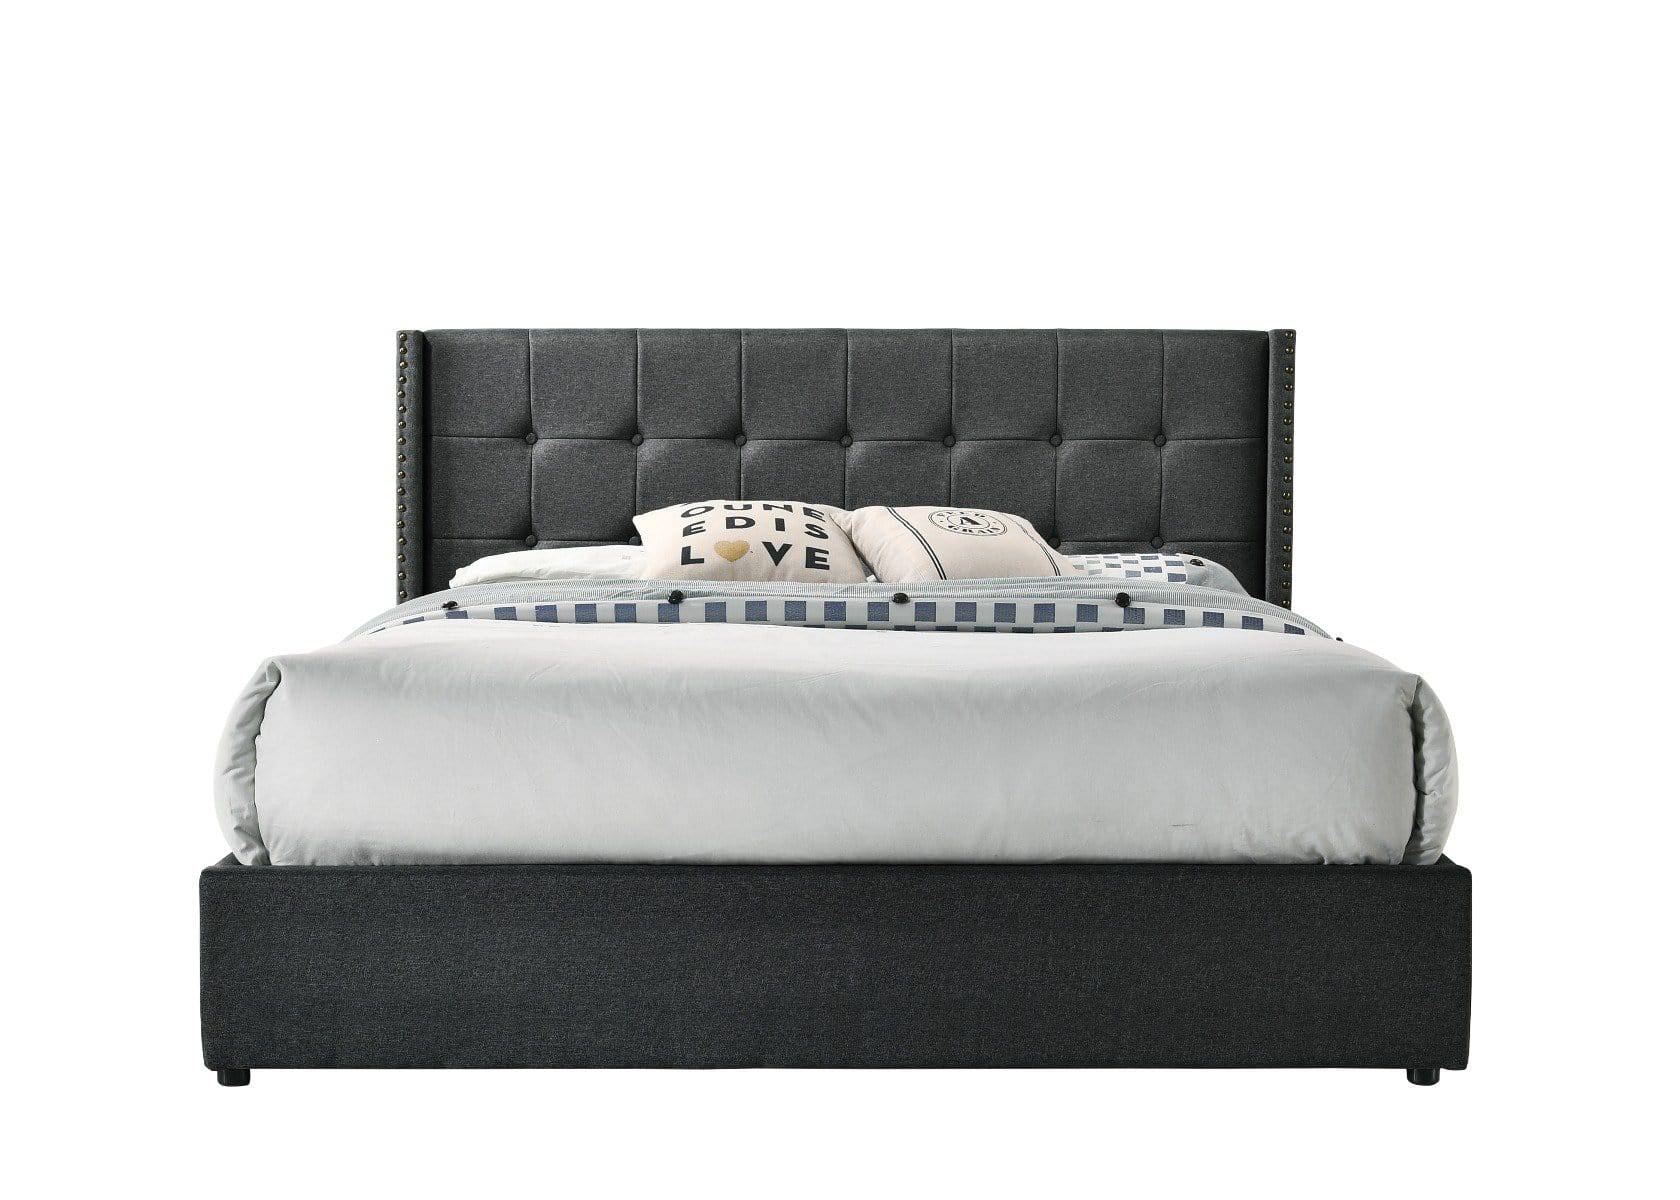 Queen Sized Winged Fabric Bed Frame with Gas Lift Storage in Charcoal - Newstart Furniture